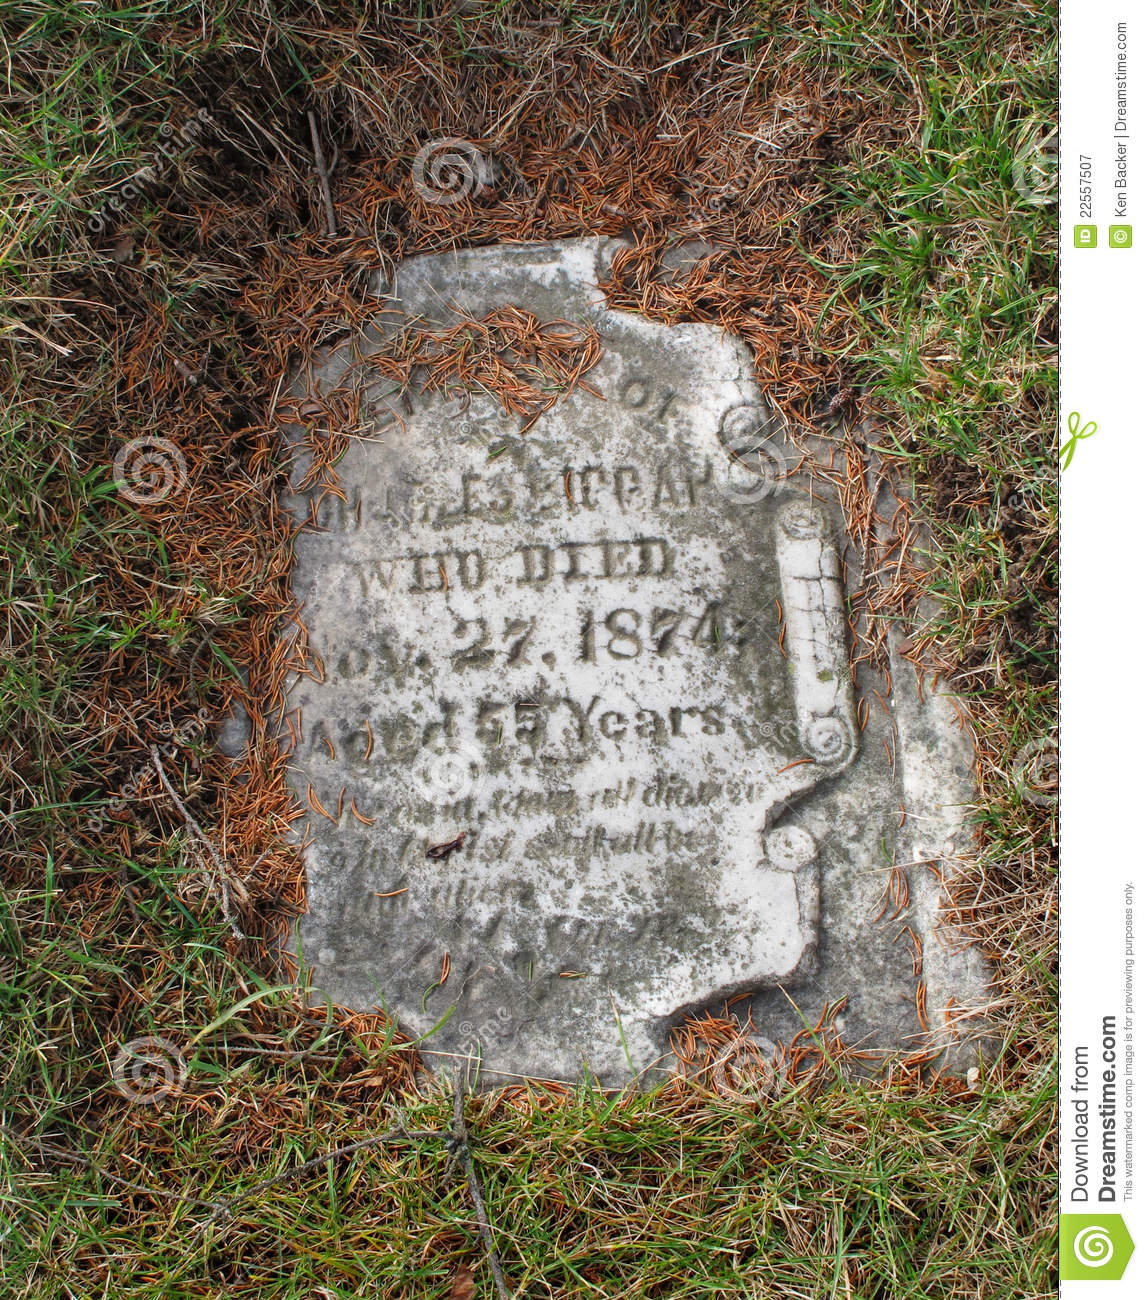 Flat Old And Worn Stone Vintage Grave Tombstone Sunken Below The